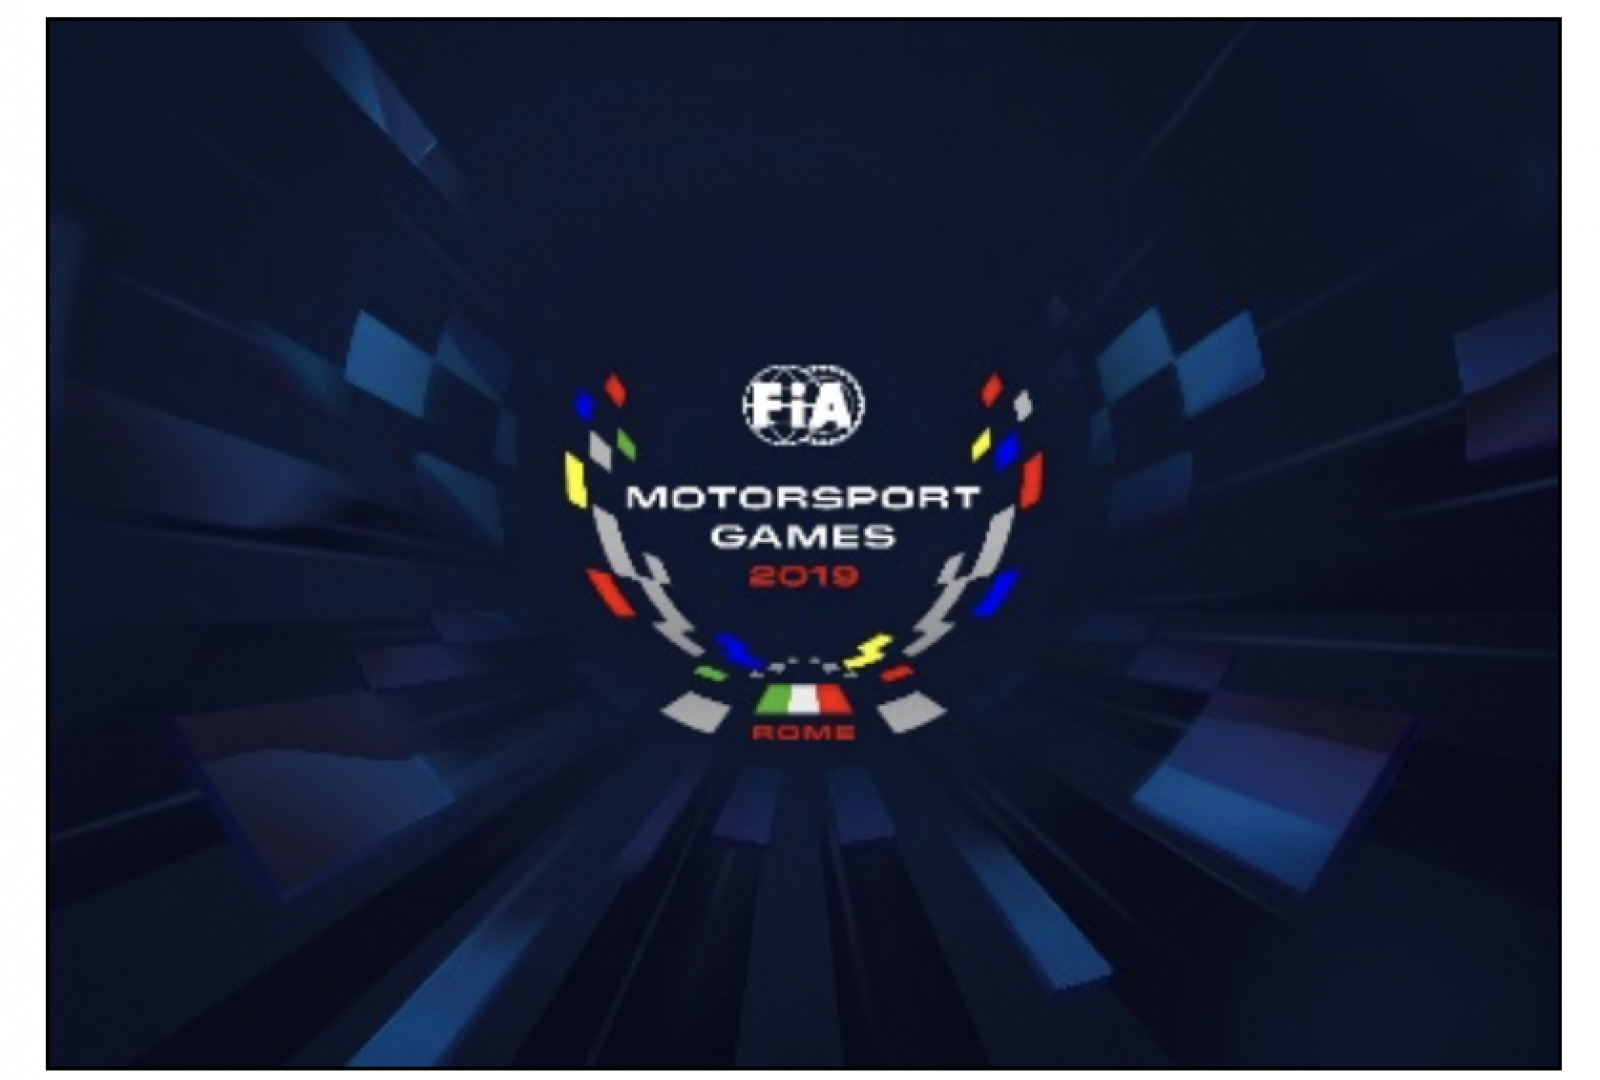 SRO Motorsports Group to promote inaugural FIA Motorsport Games in Rome